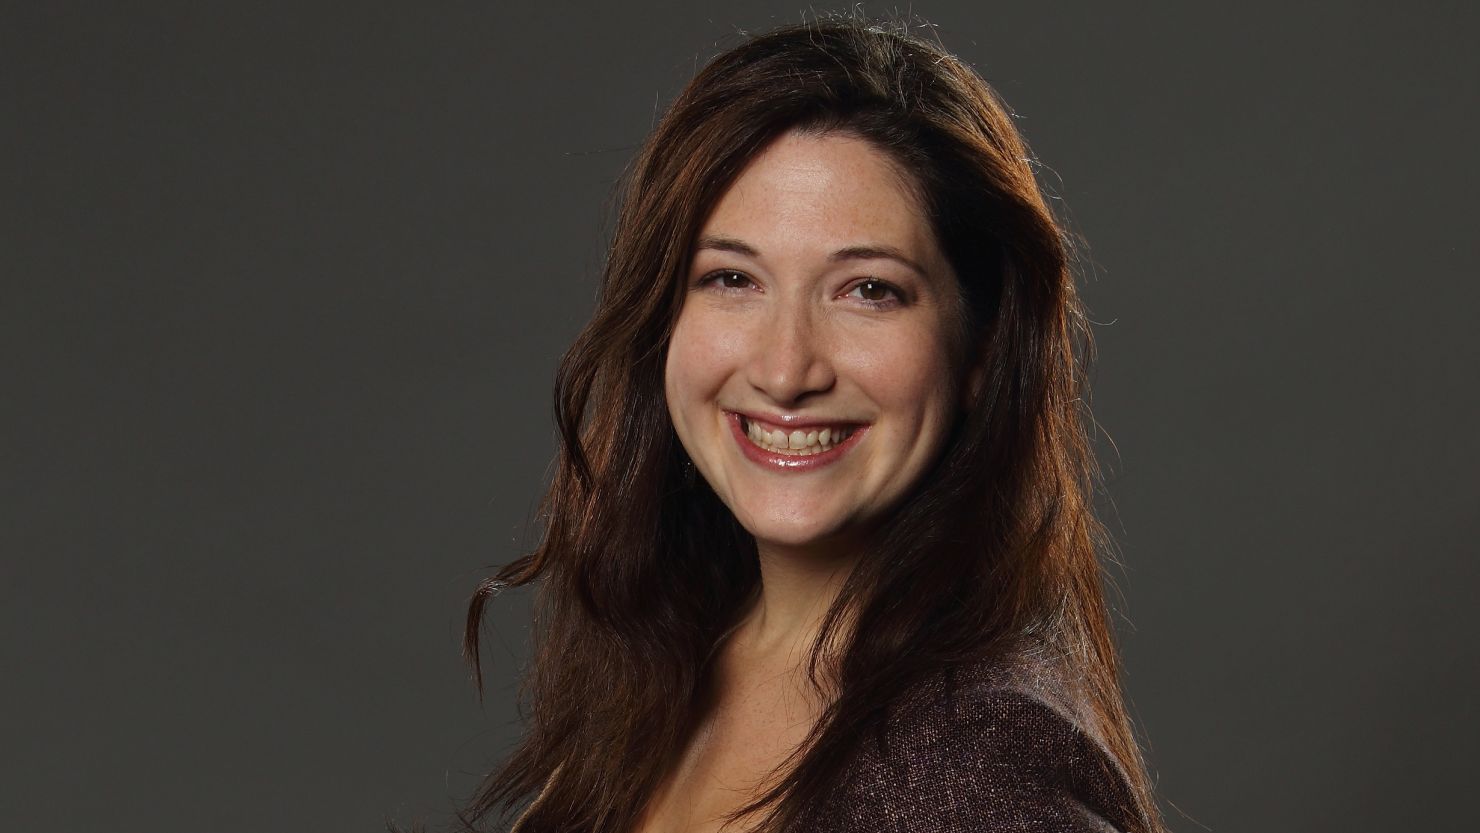 Randi Zuckerberg says a Bravo reality show''s mission  will be to humanize the tech community.